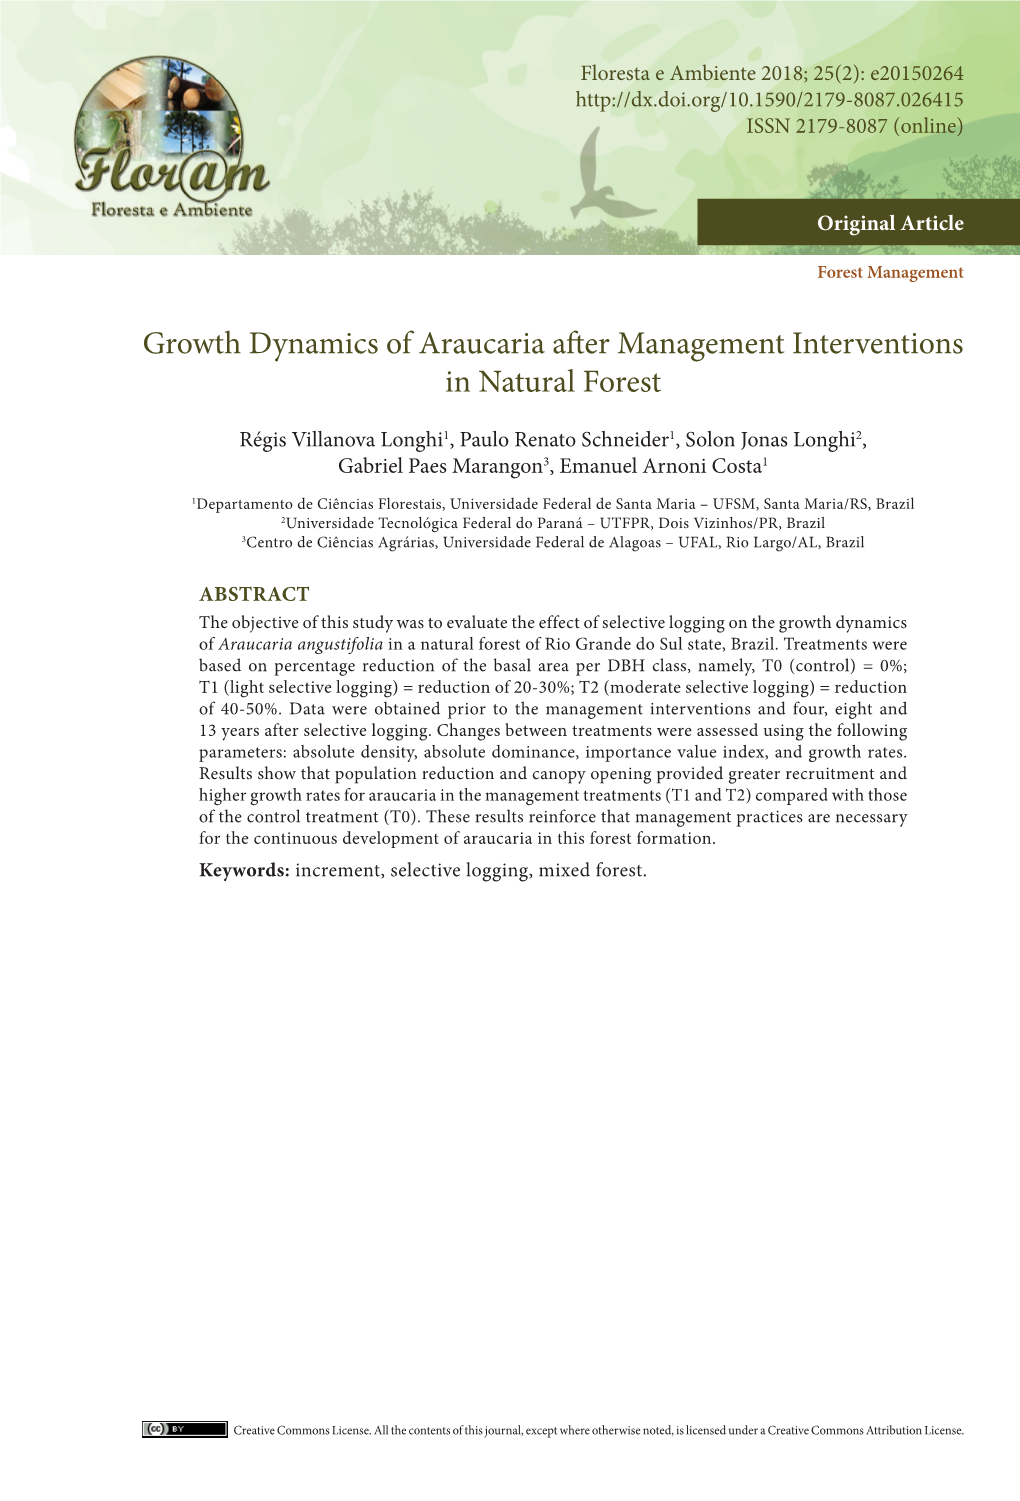 Growth Dynamics of Araucaria After Management Interventions in Natural Forest